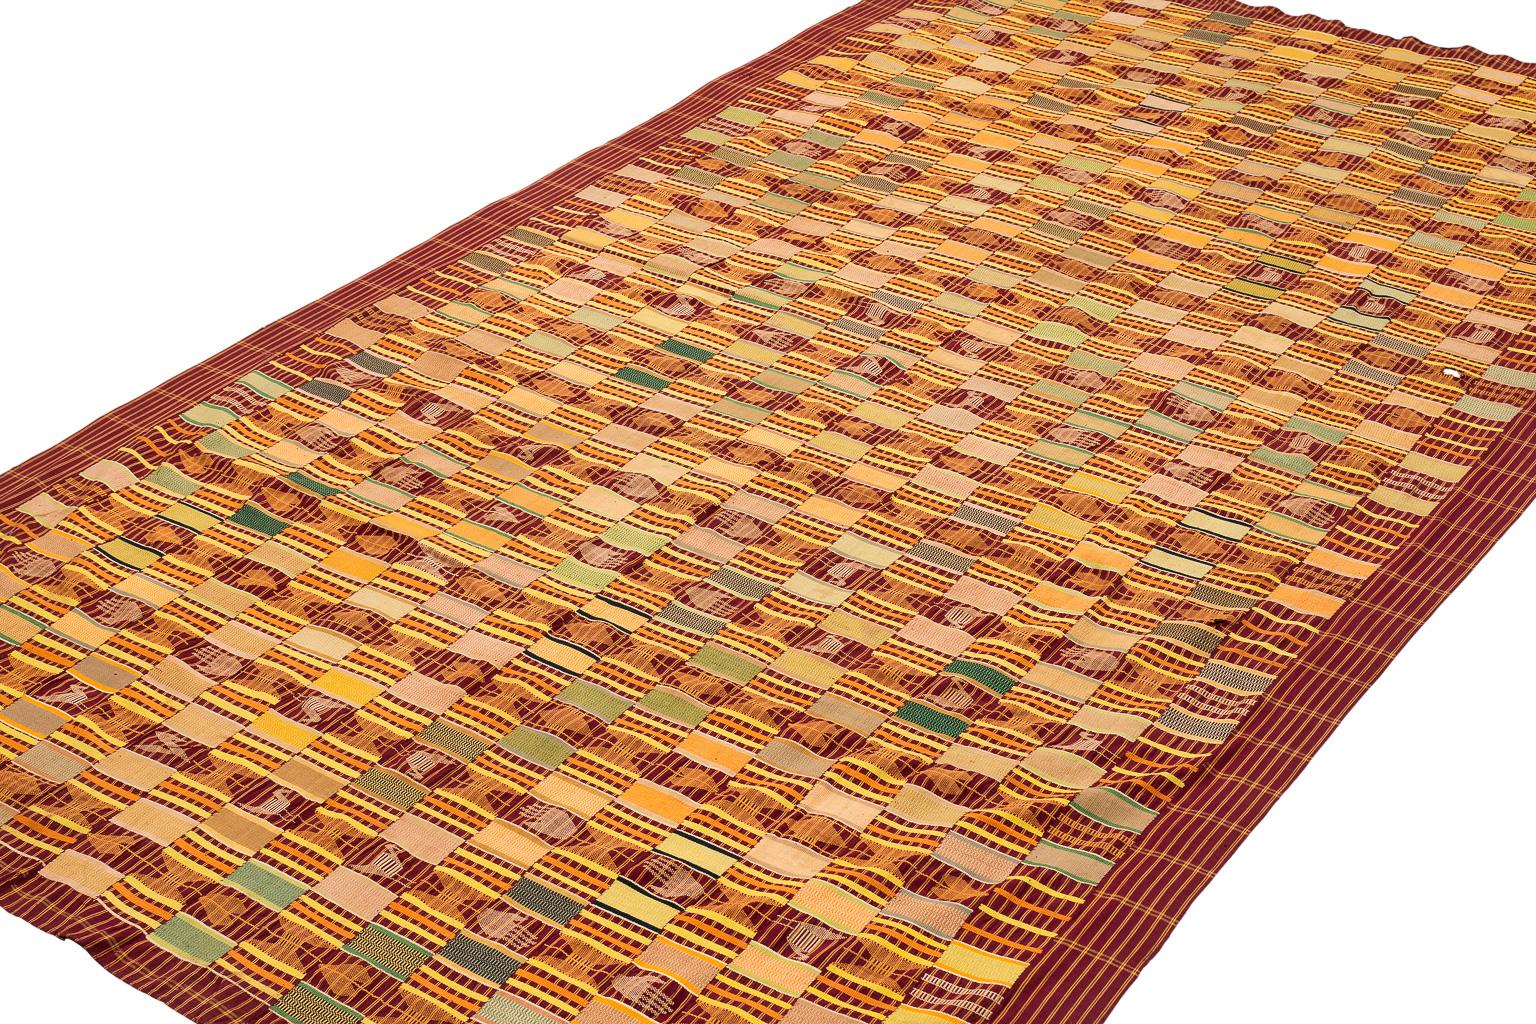 This African Men's Ewe Kente cloth has a light aubergine purple background with highlights of orange, yellow, light green, light blue and dark blue amongst other colors.

It is a very royal weaving in that it has a lot of figures woven into it.